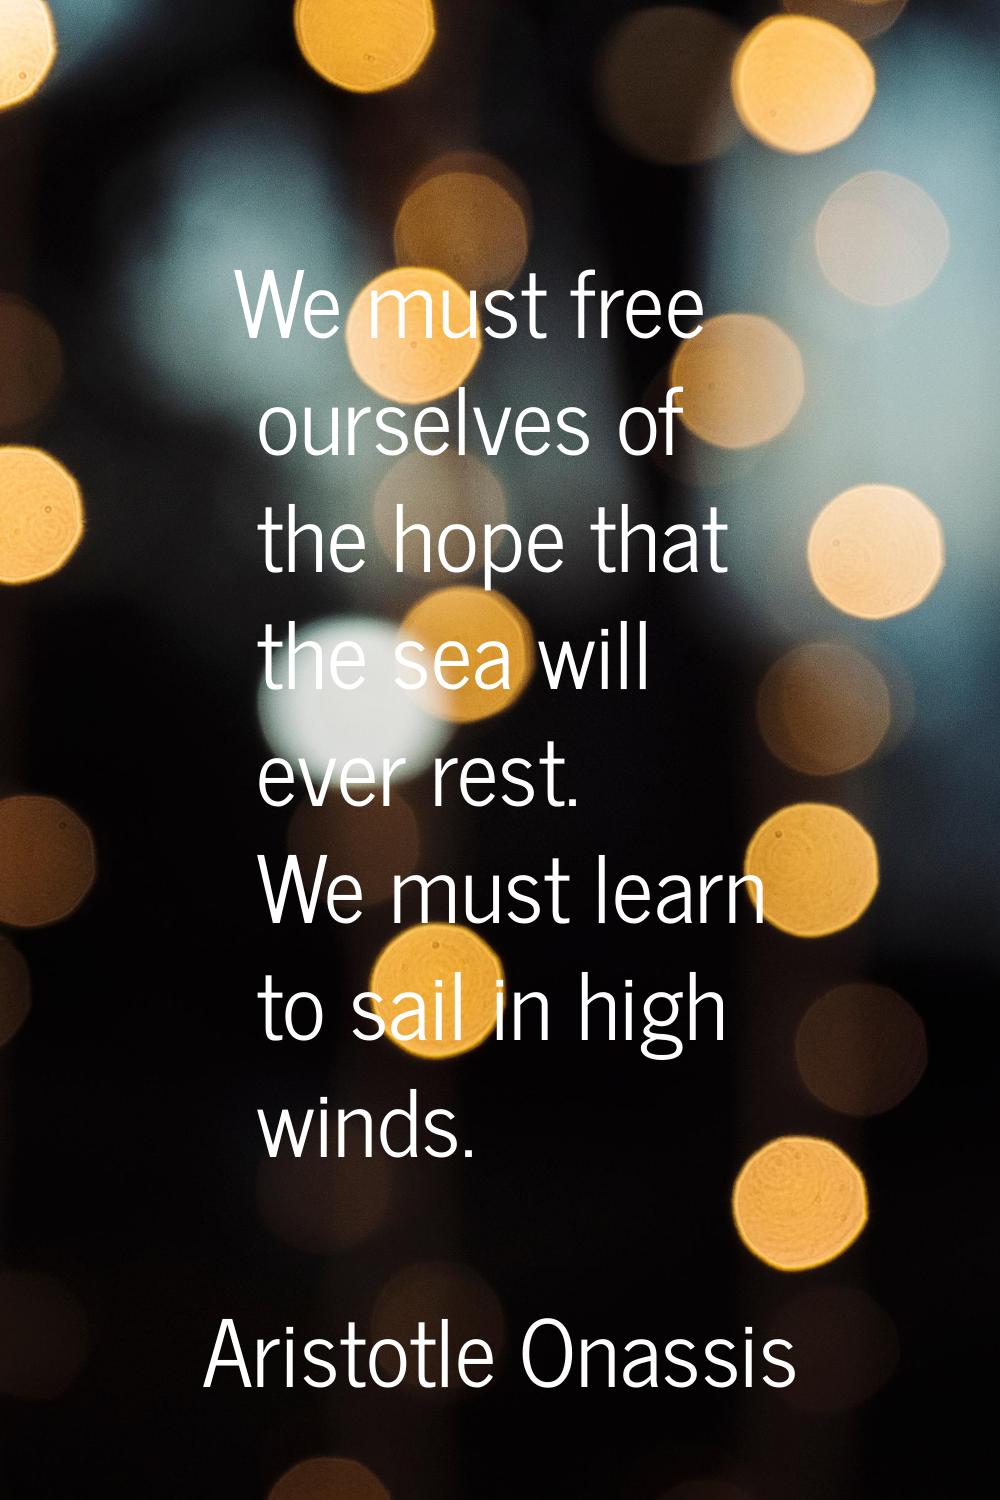 We must free ourselves of the hope that the sea will ever rest. We must learn to sail in high winds